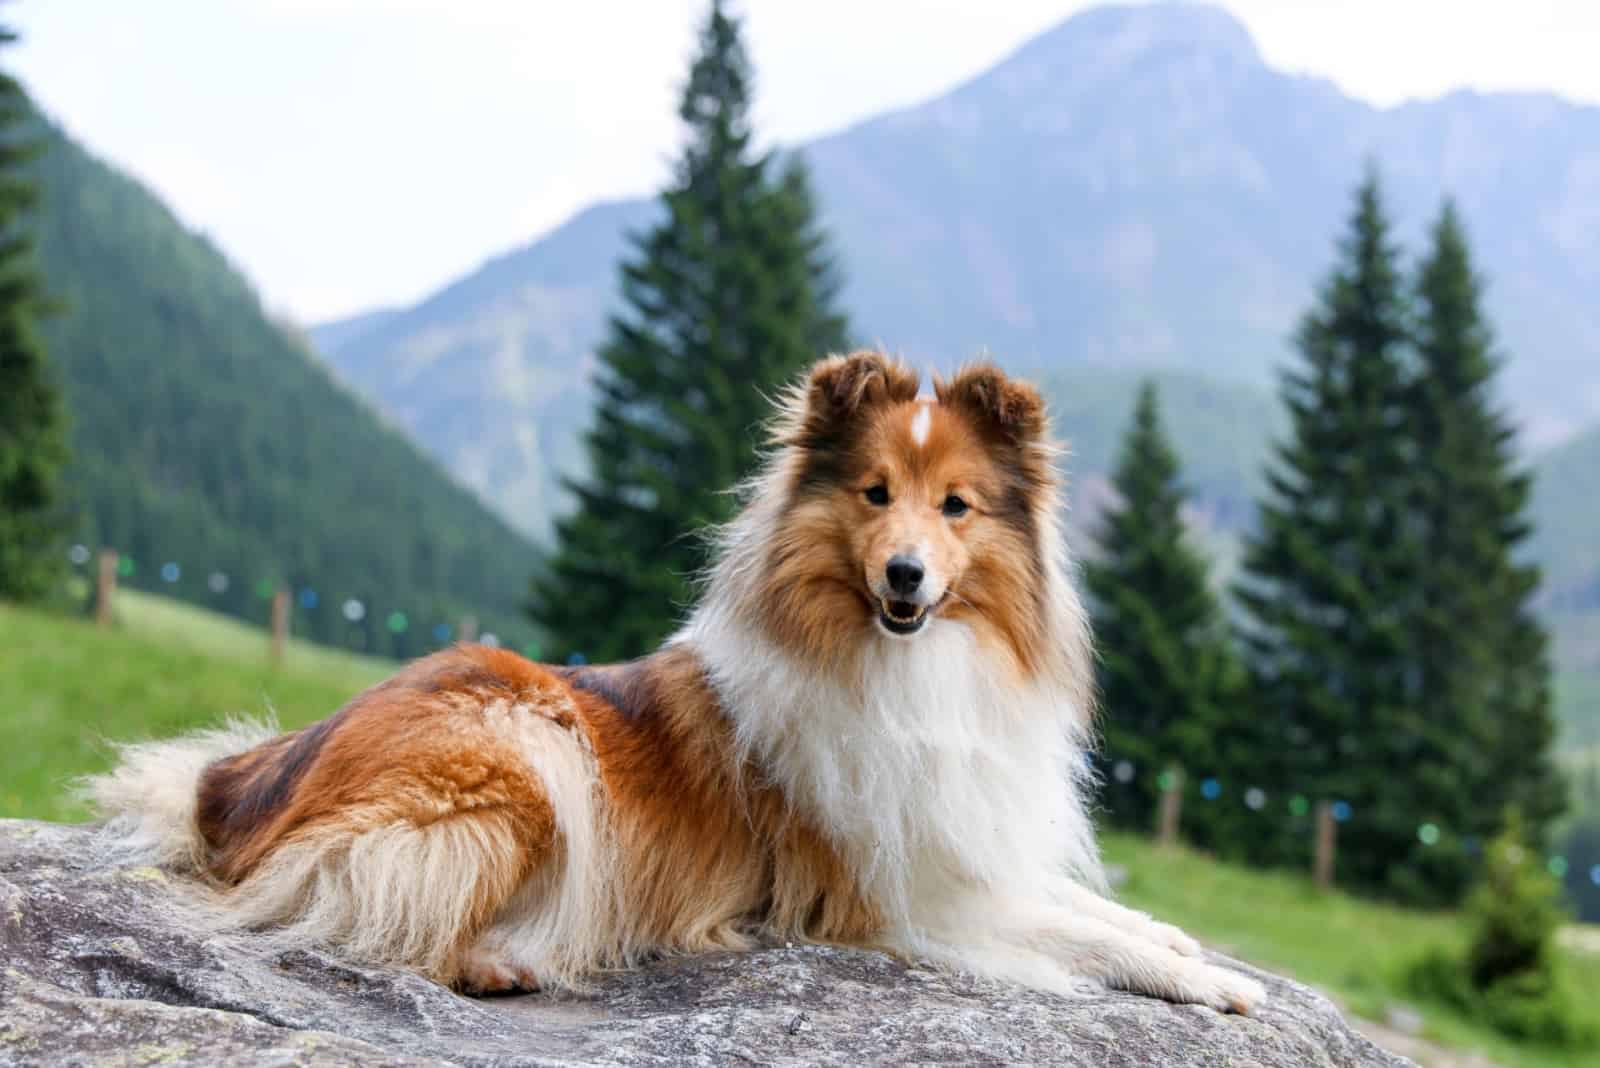 Shetland Sheepdog lying on a stone in the forest